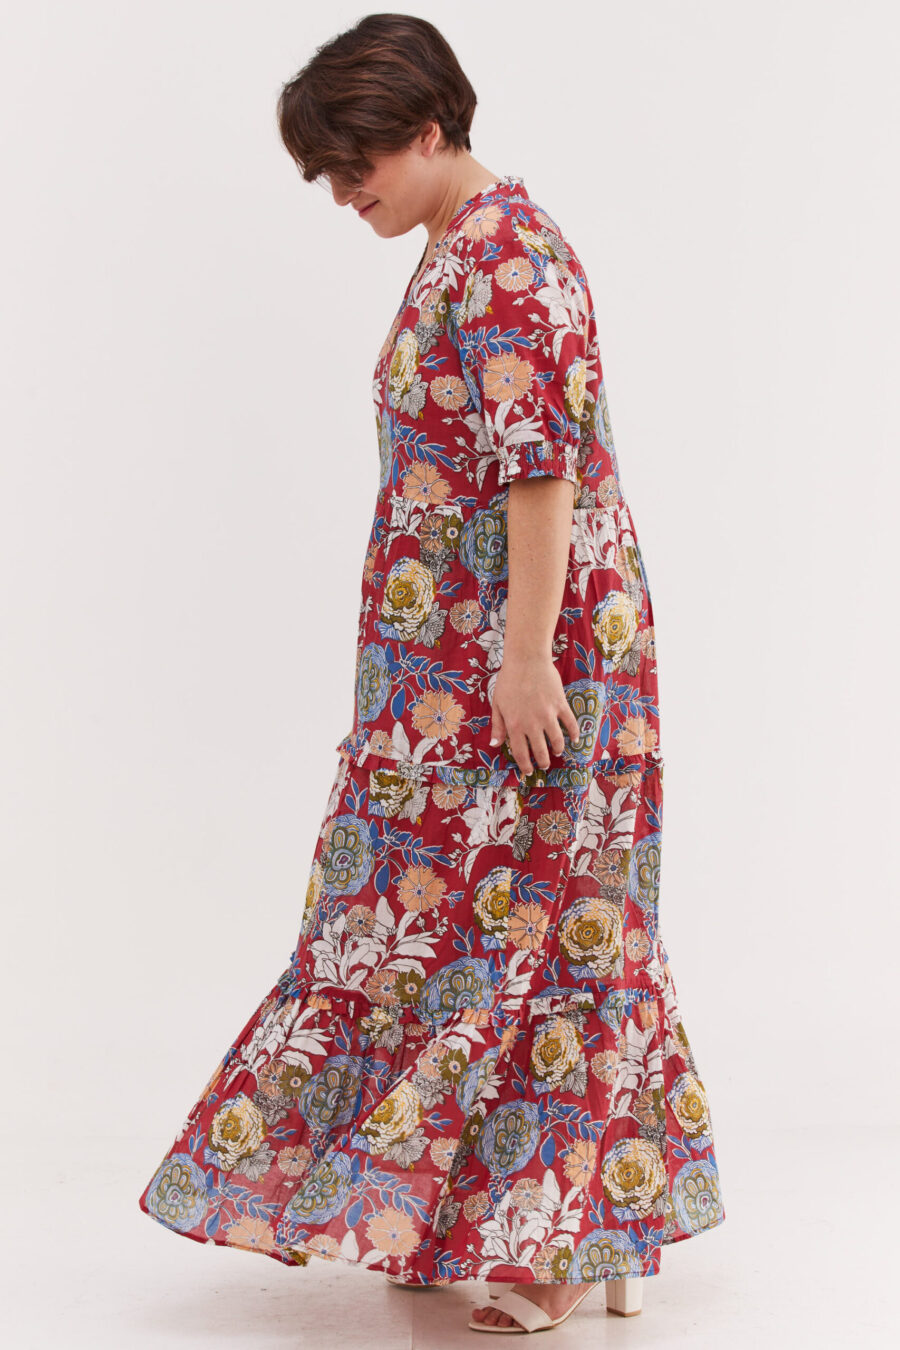 Efrat dress | Uniquely designed maxi dress - Red blossom, colorful floral print on a red dress by comfort zone boutique